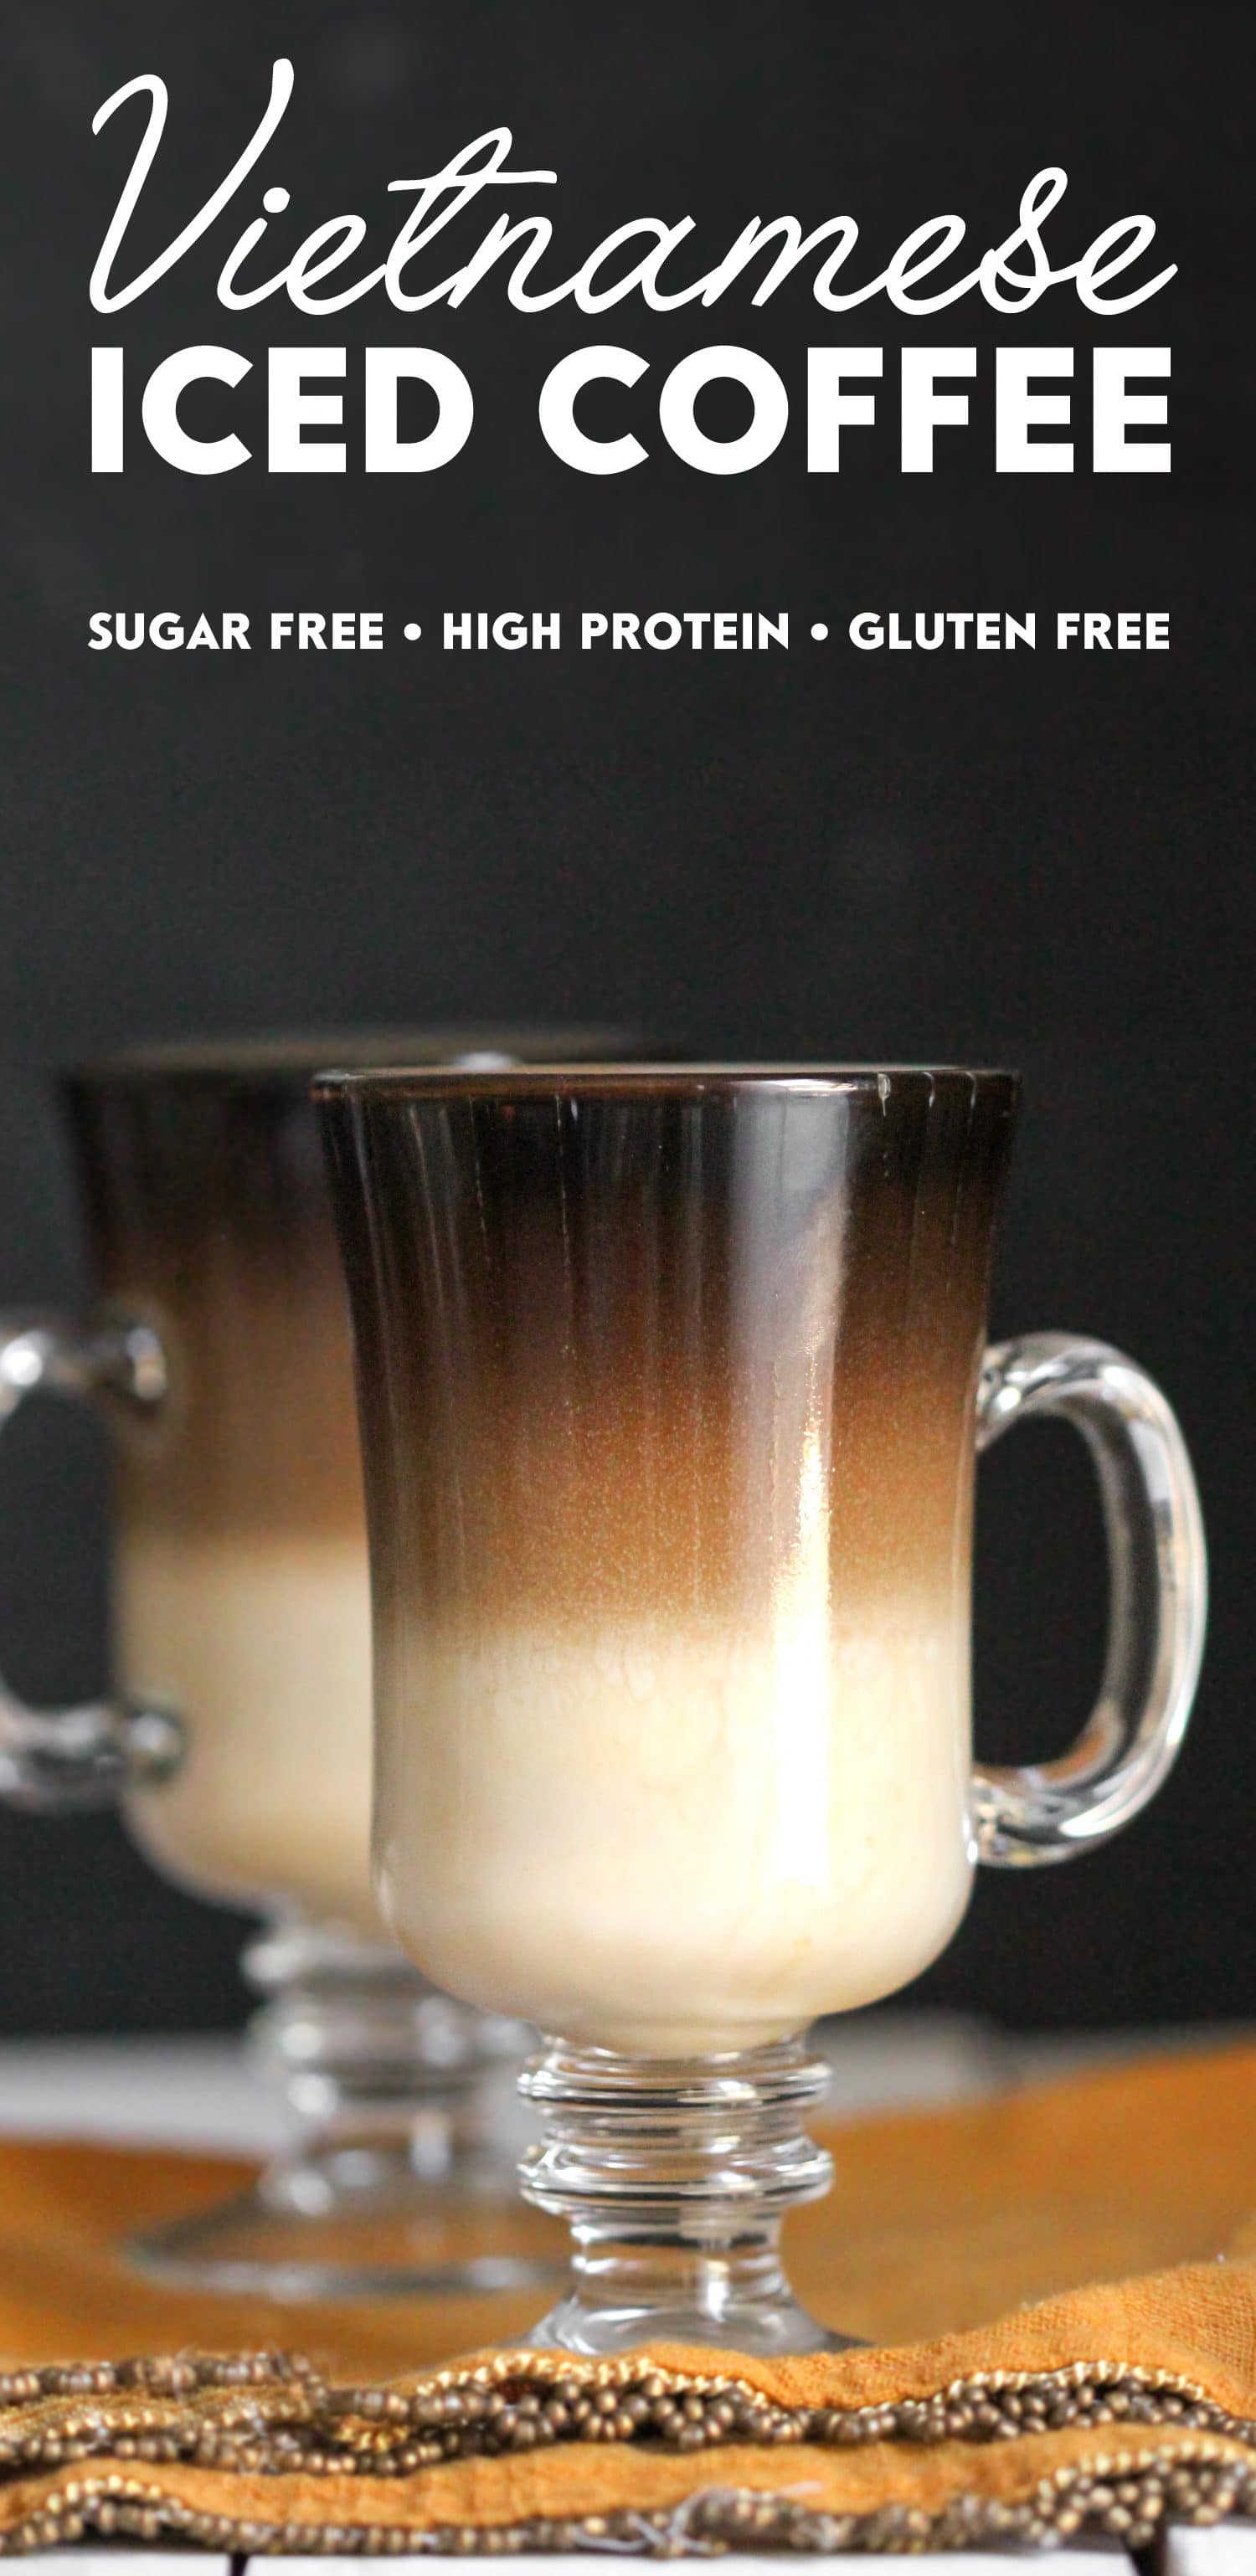 Get your caffeine fix with this sweet and creamy, Healthy Vietnamese Iced Coffee recipe made refined sugar free, fat free, high protein, and gluten free! No need for the sugary condensed milk calorie-bomb when you've got THIS magic in a cup! Healthy Dessert Recipes at Desserts with Benefits